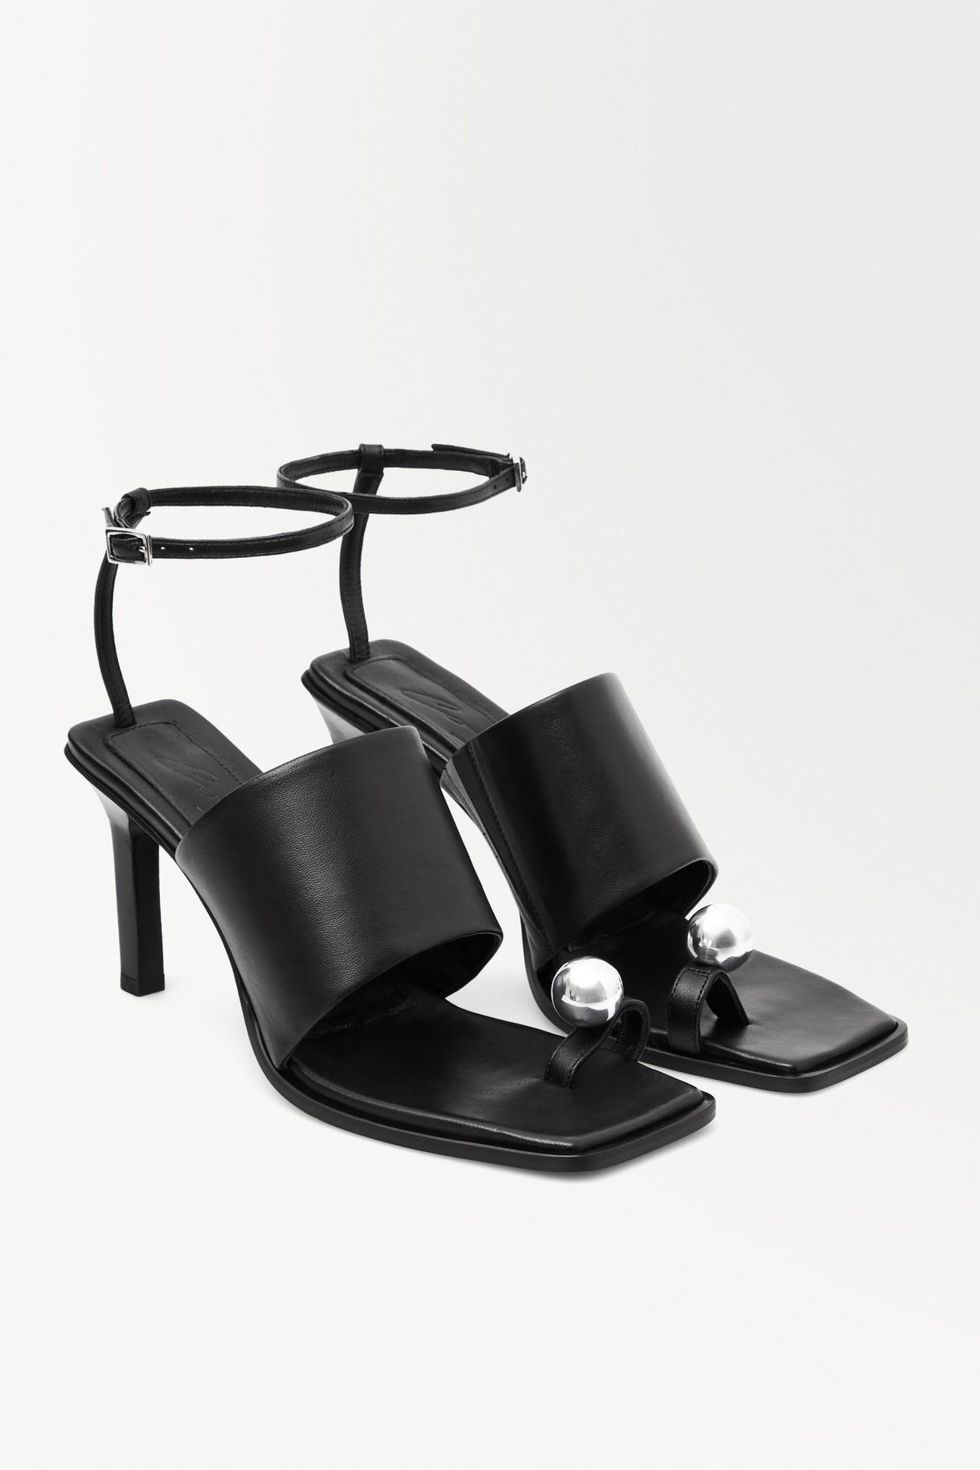 : THE SPHERE HEELED SANDALS